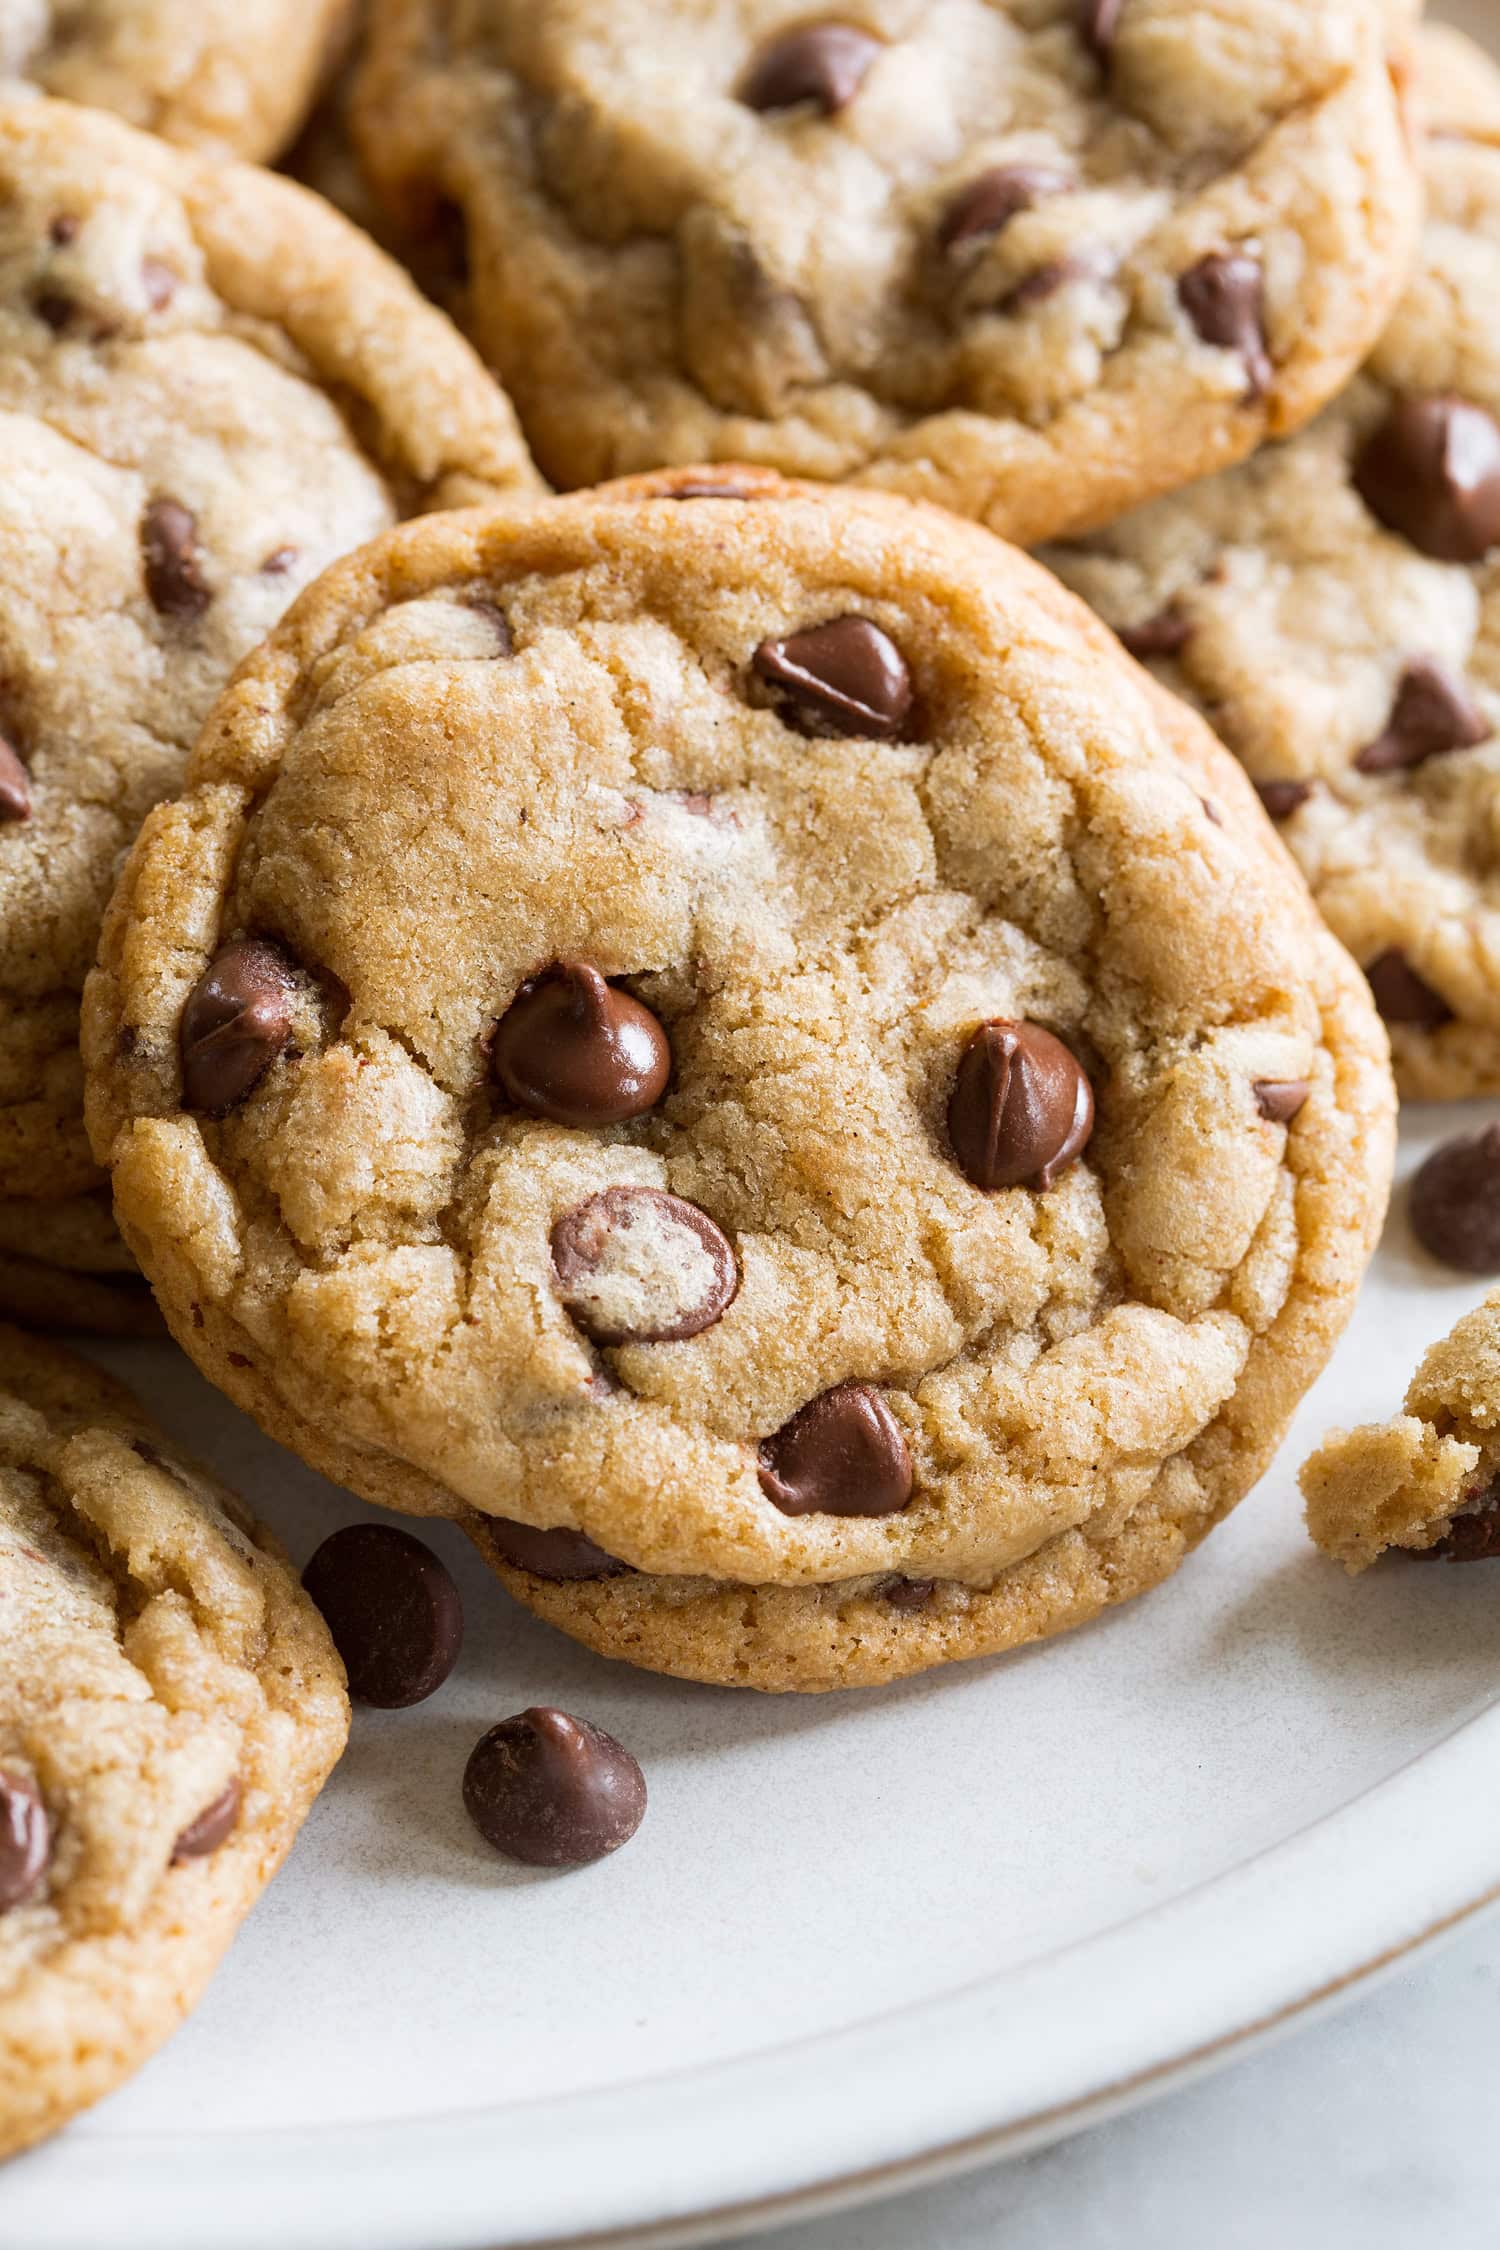 Close up photo of a browned butter chocolate chip cookie.